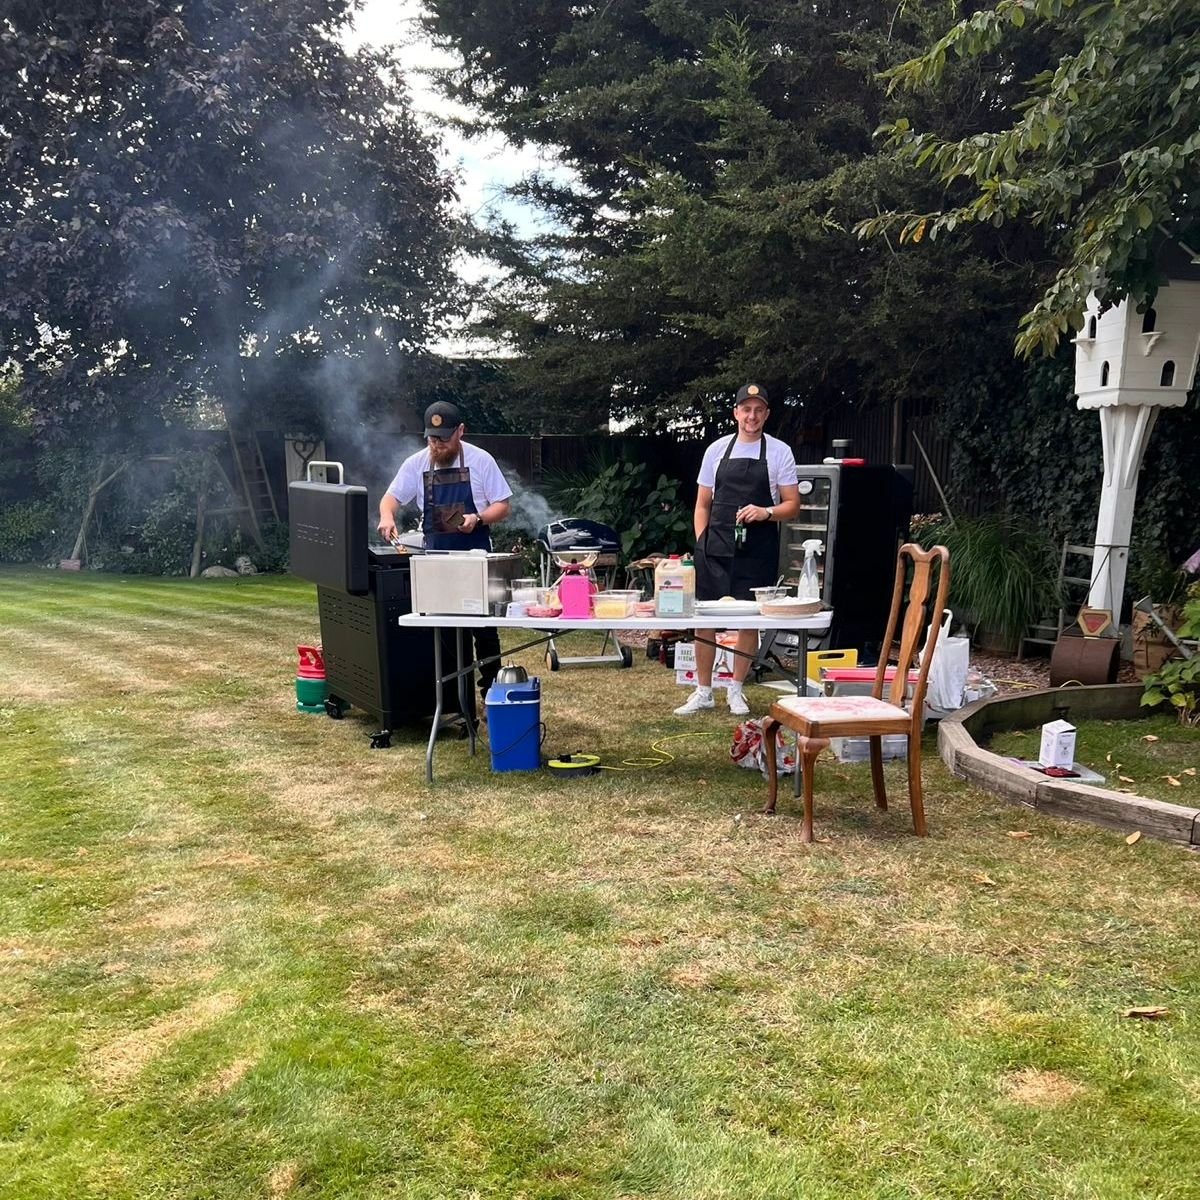 A busy bank holiday Monday cooking up a feast for 40 people at a 30th wedding anniversary in #Essex . We had smash burgers, gourmet smoked sausage, babyback ribs, chicken wings, garlic bread, salmon and a few other little bits. All cooked on site usi